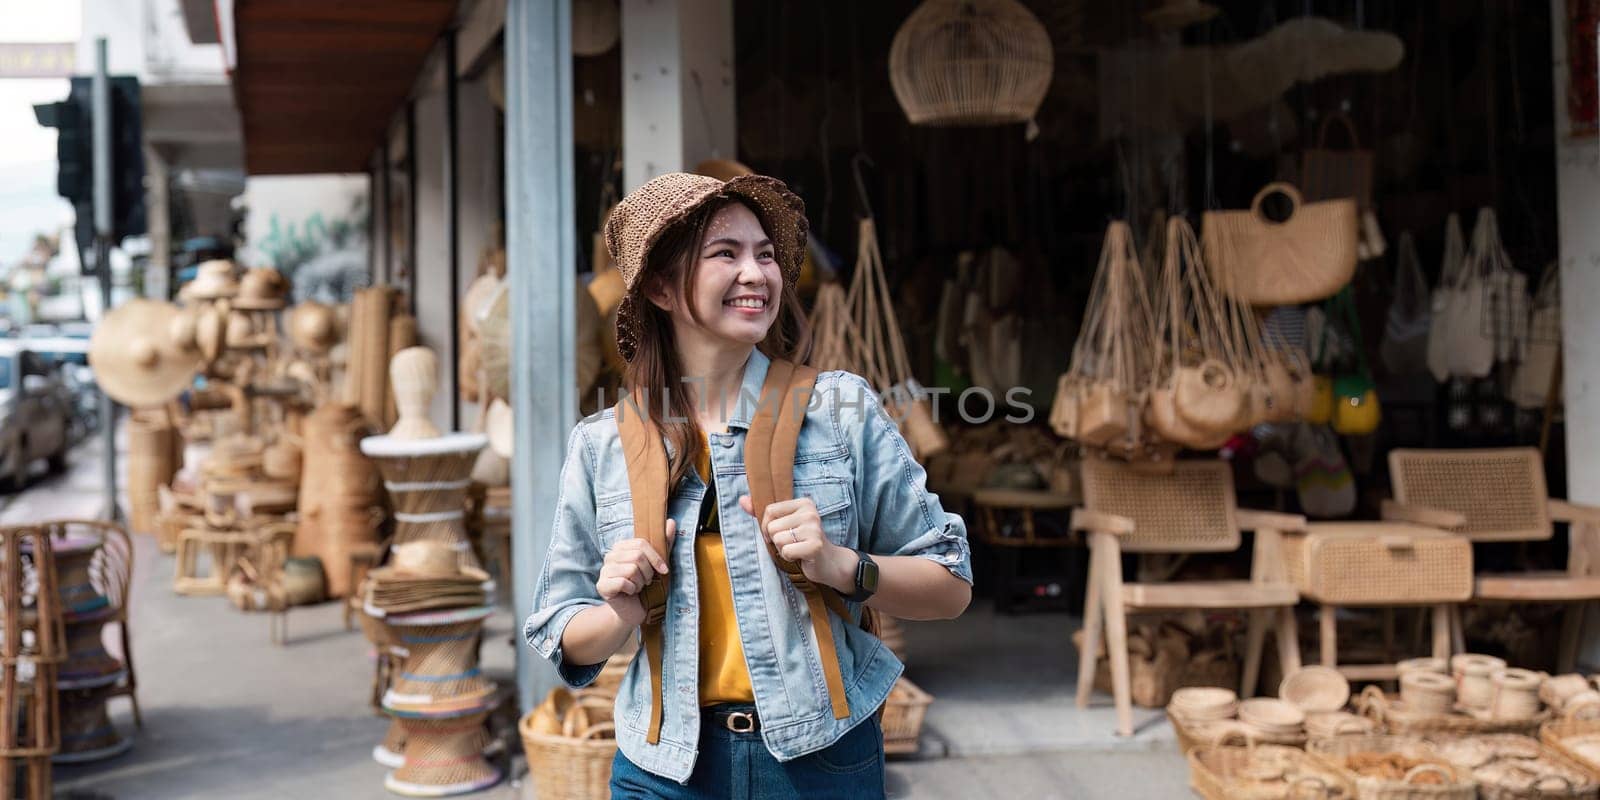 A cheerful young woman with a backpack and hat explores a local market filled with handmade crafts and souvenirs, capturing the essence of travel and adventure in an urban setting.